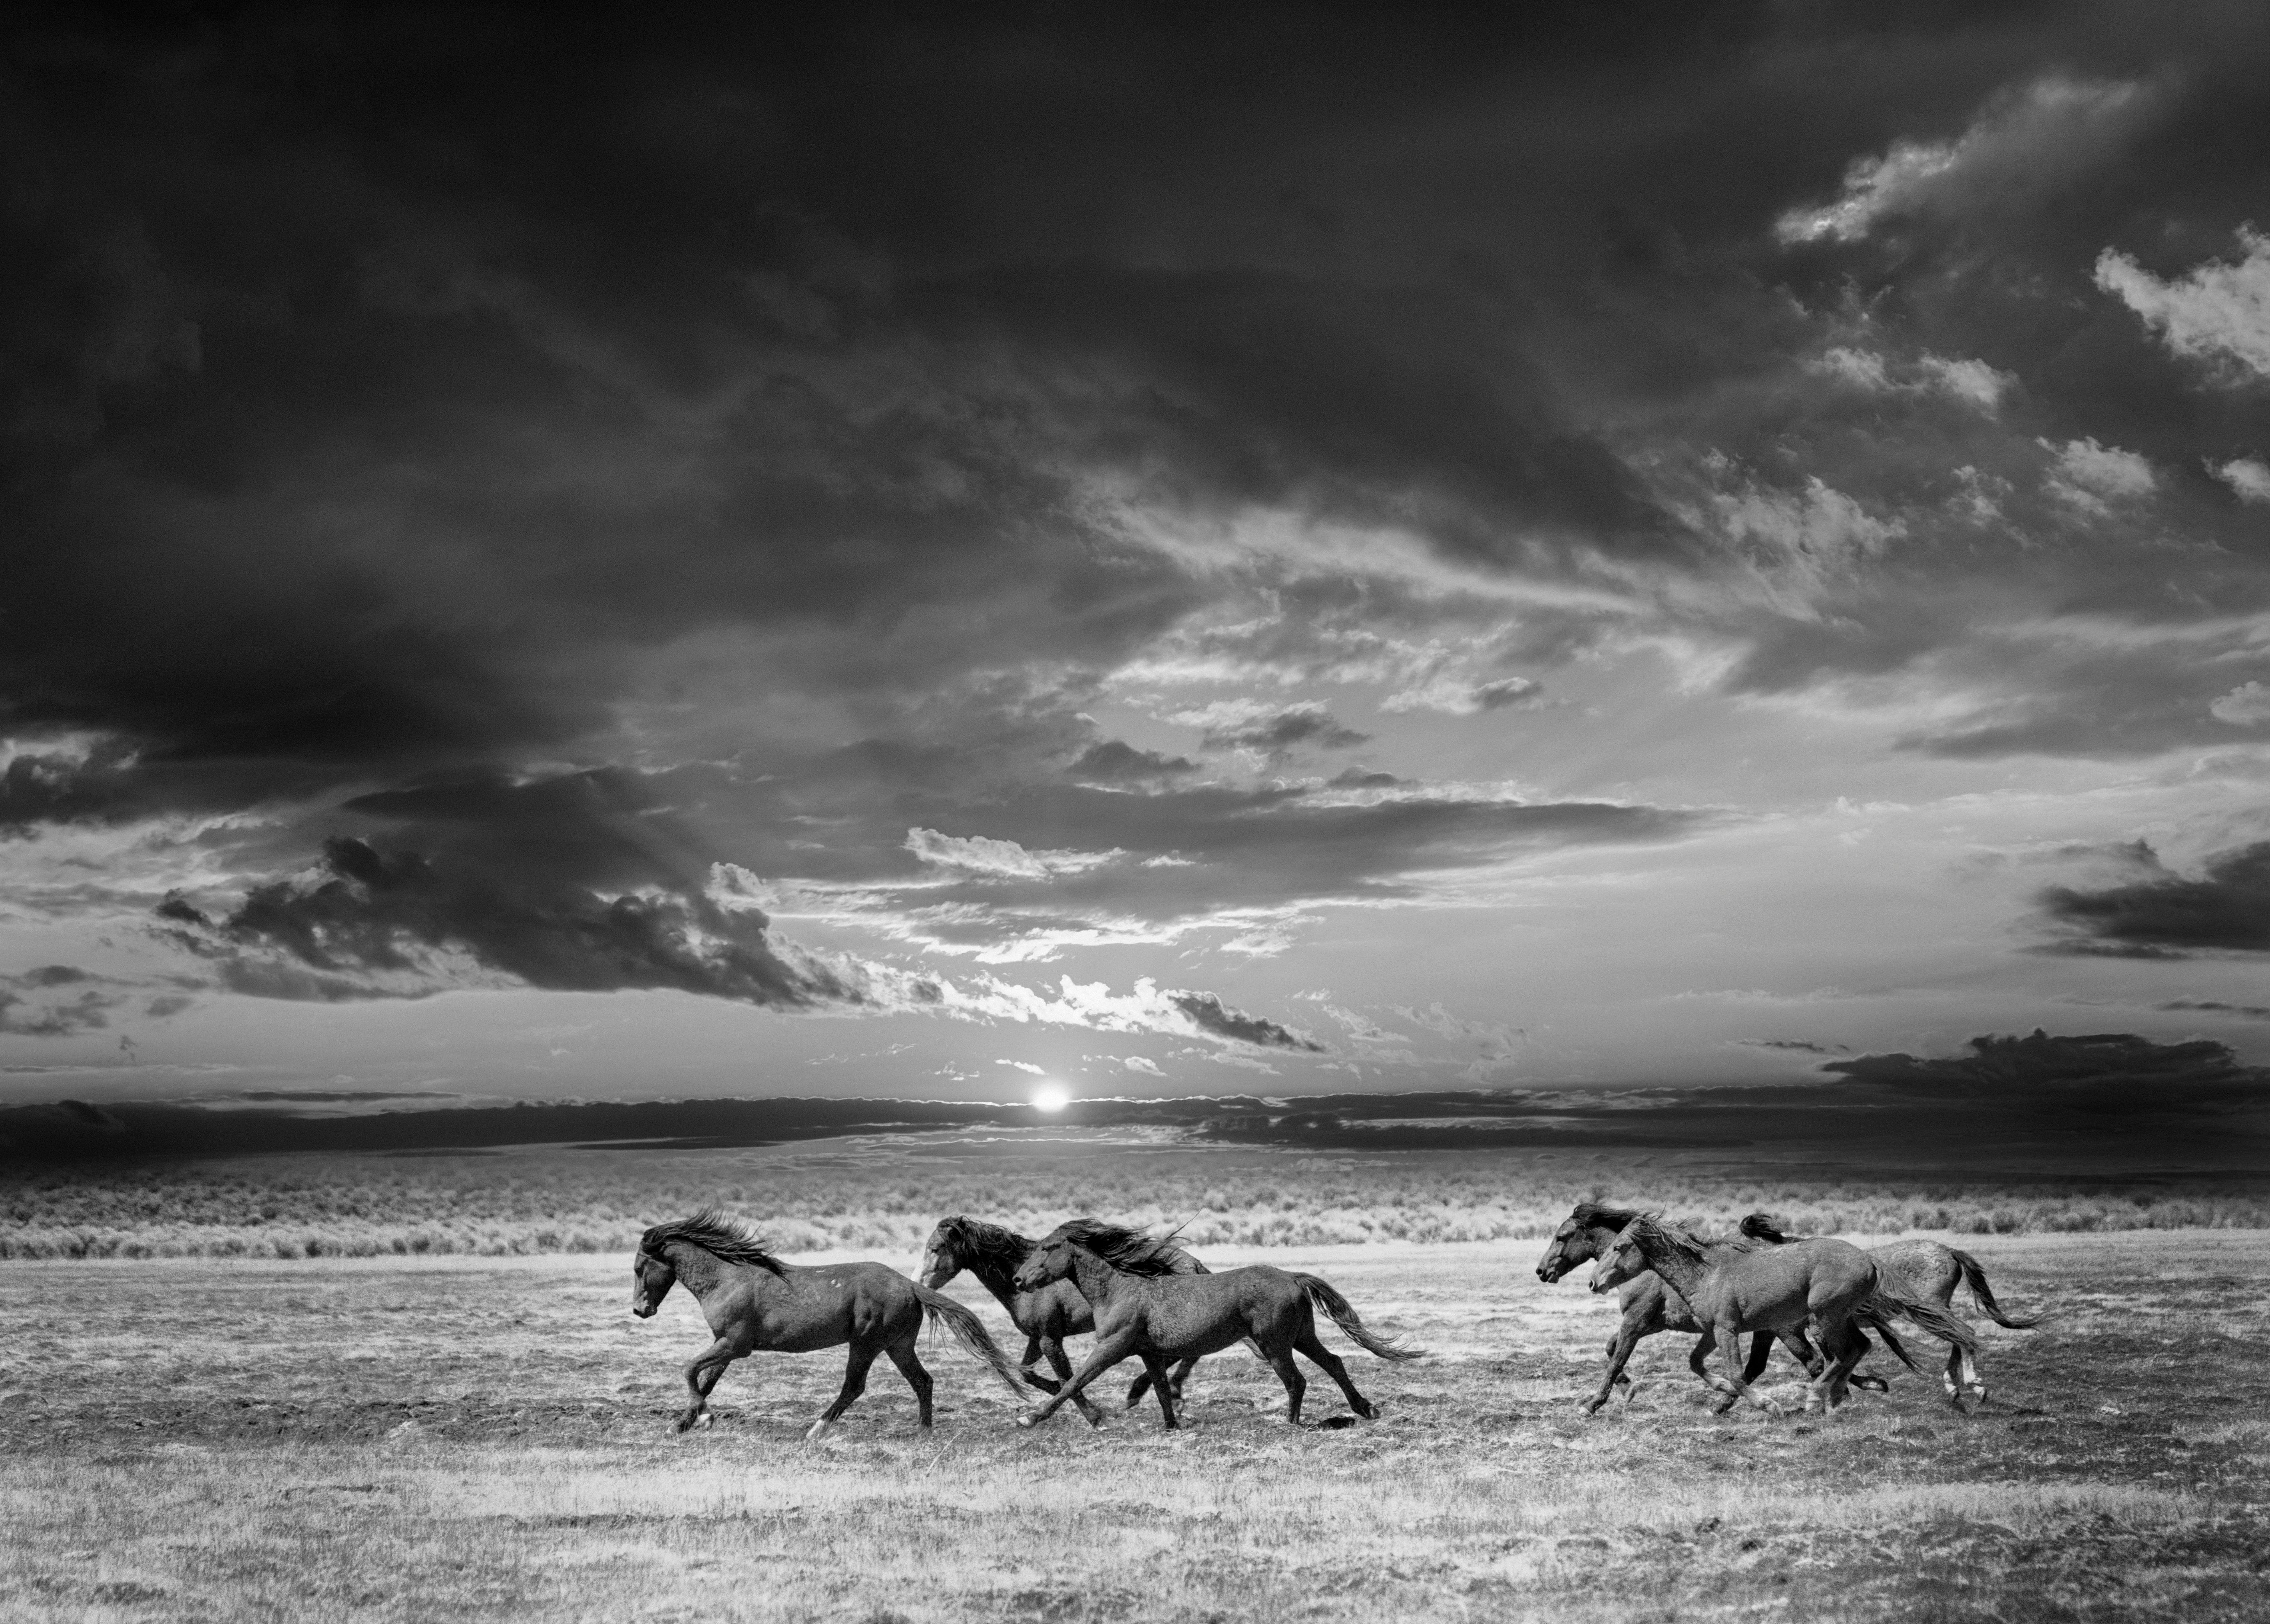 Shane Russeck Animal Print - "Chasing the Light" 60x40 Black & White Photography of Wild Horses Photograph